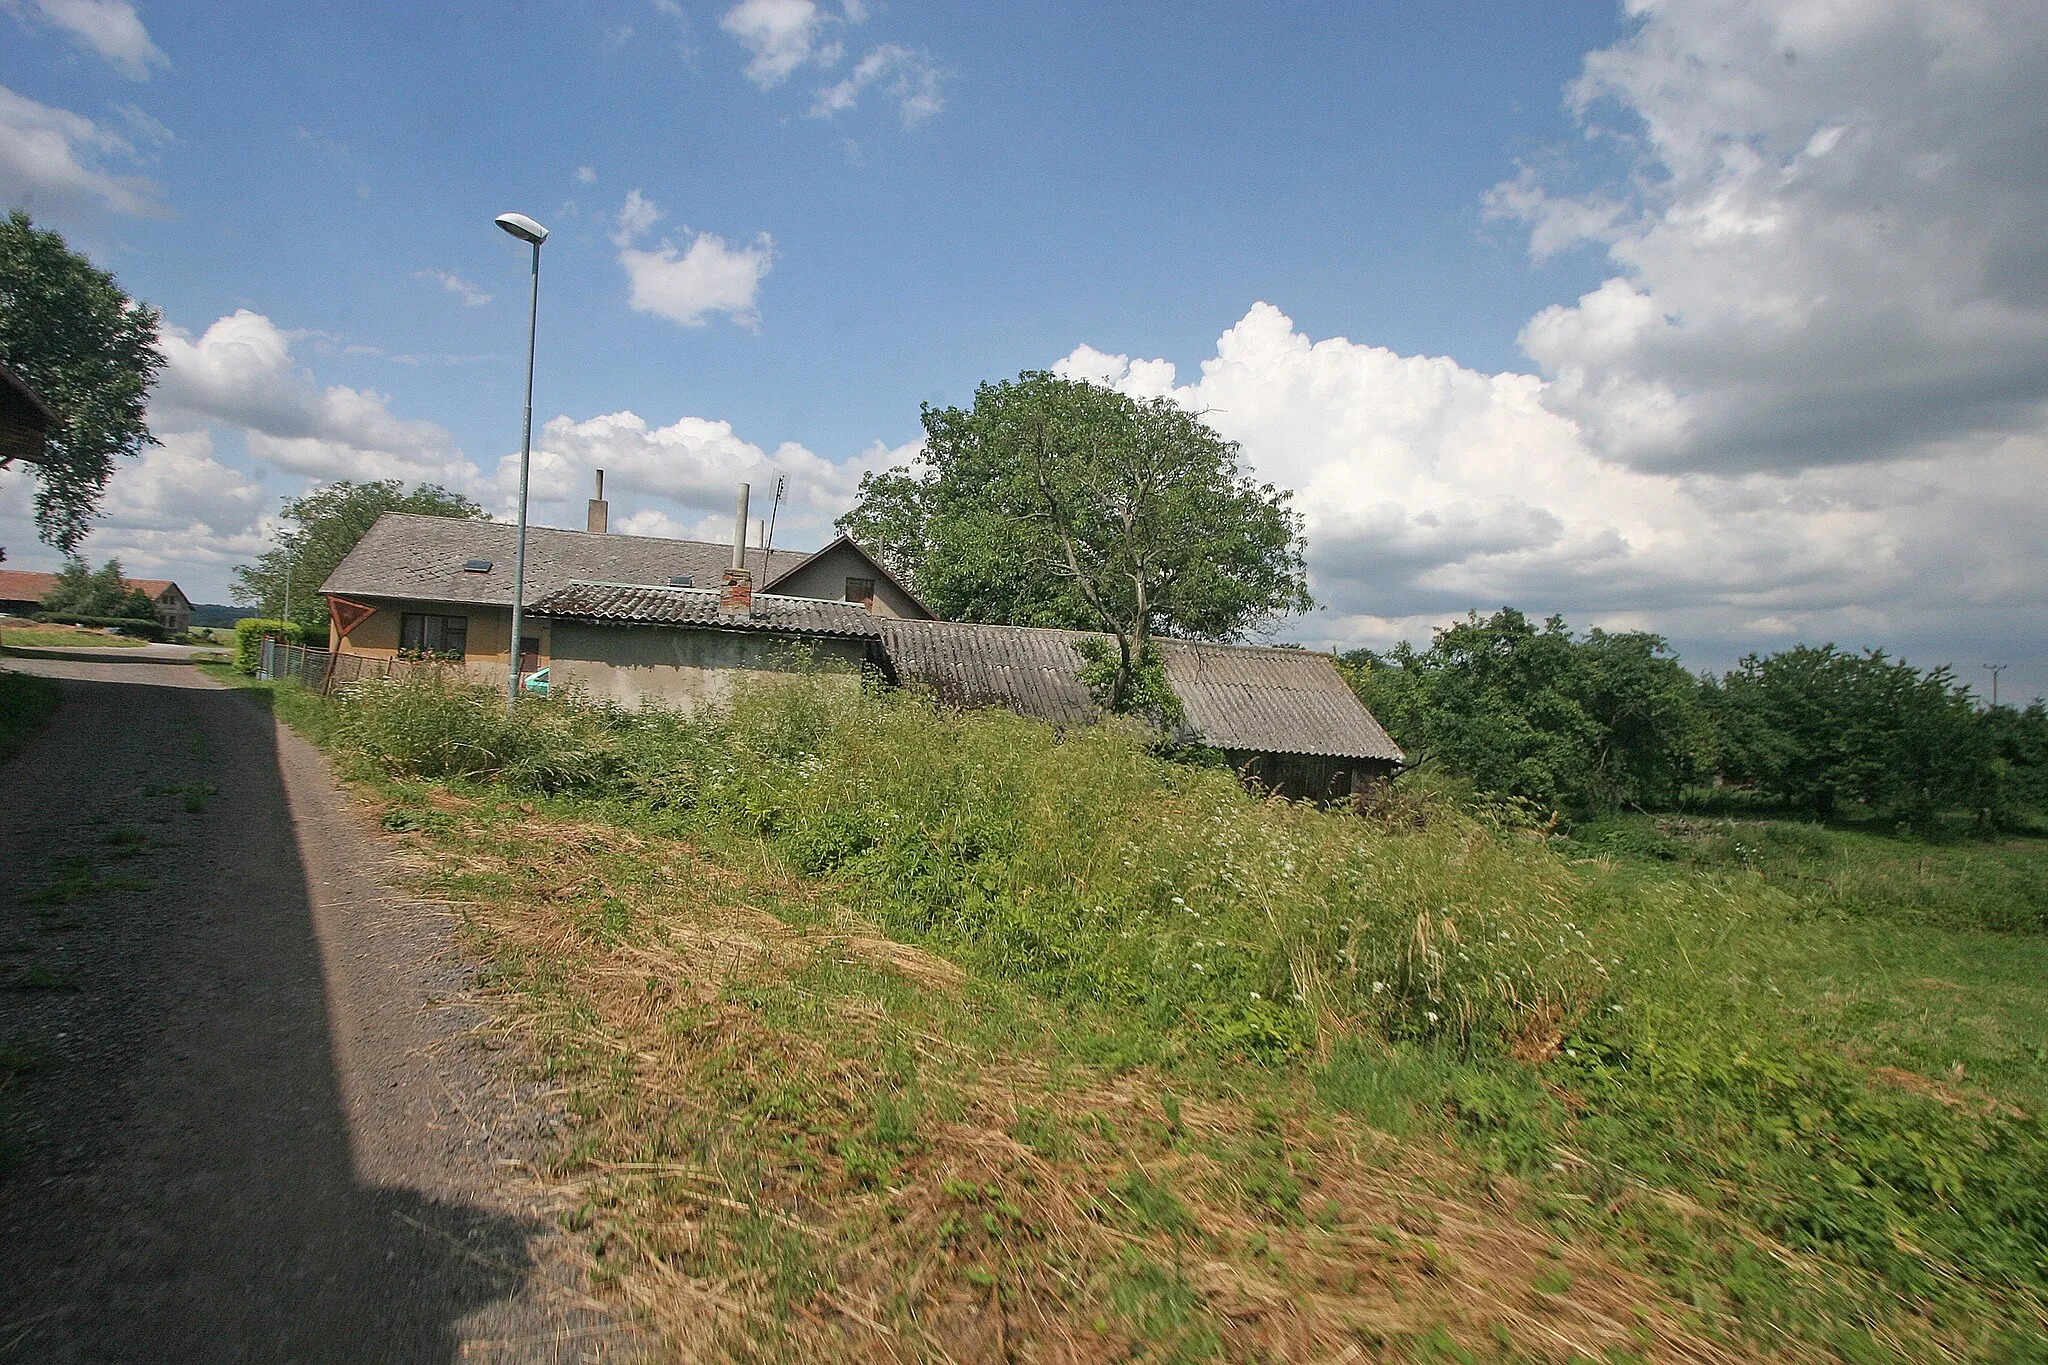 Photo showing: Rašín čp. 37
Camera location 50° 19′ 59.06″ N, 15° 40′ 42.34″ E View this and other nearby images on: OpenStreetMap 50.333072;   15.678428

This file was created as a part of the photographic program of Wikimedia Czech Republic. Project: Foto českých obcí The program supports Wikimedia Commons photographers in the Czech Republic.